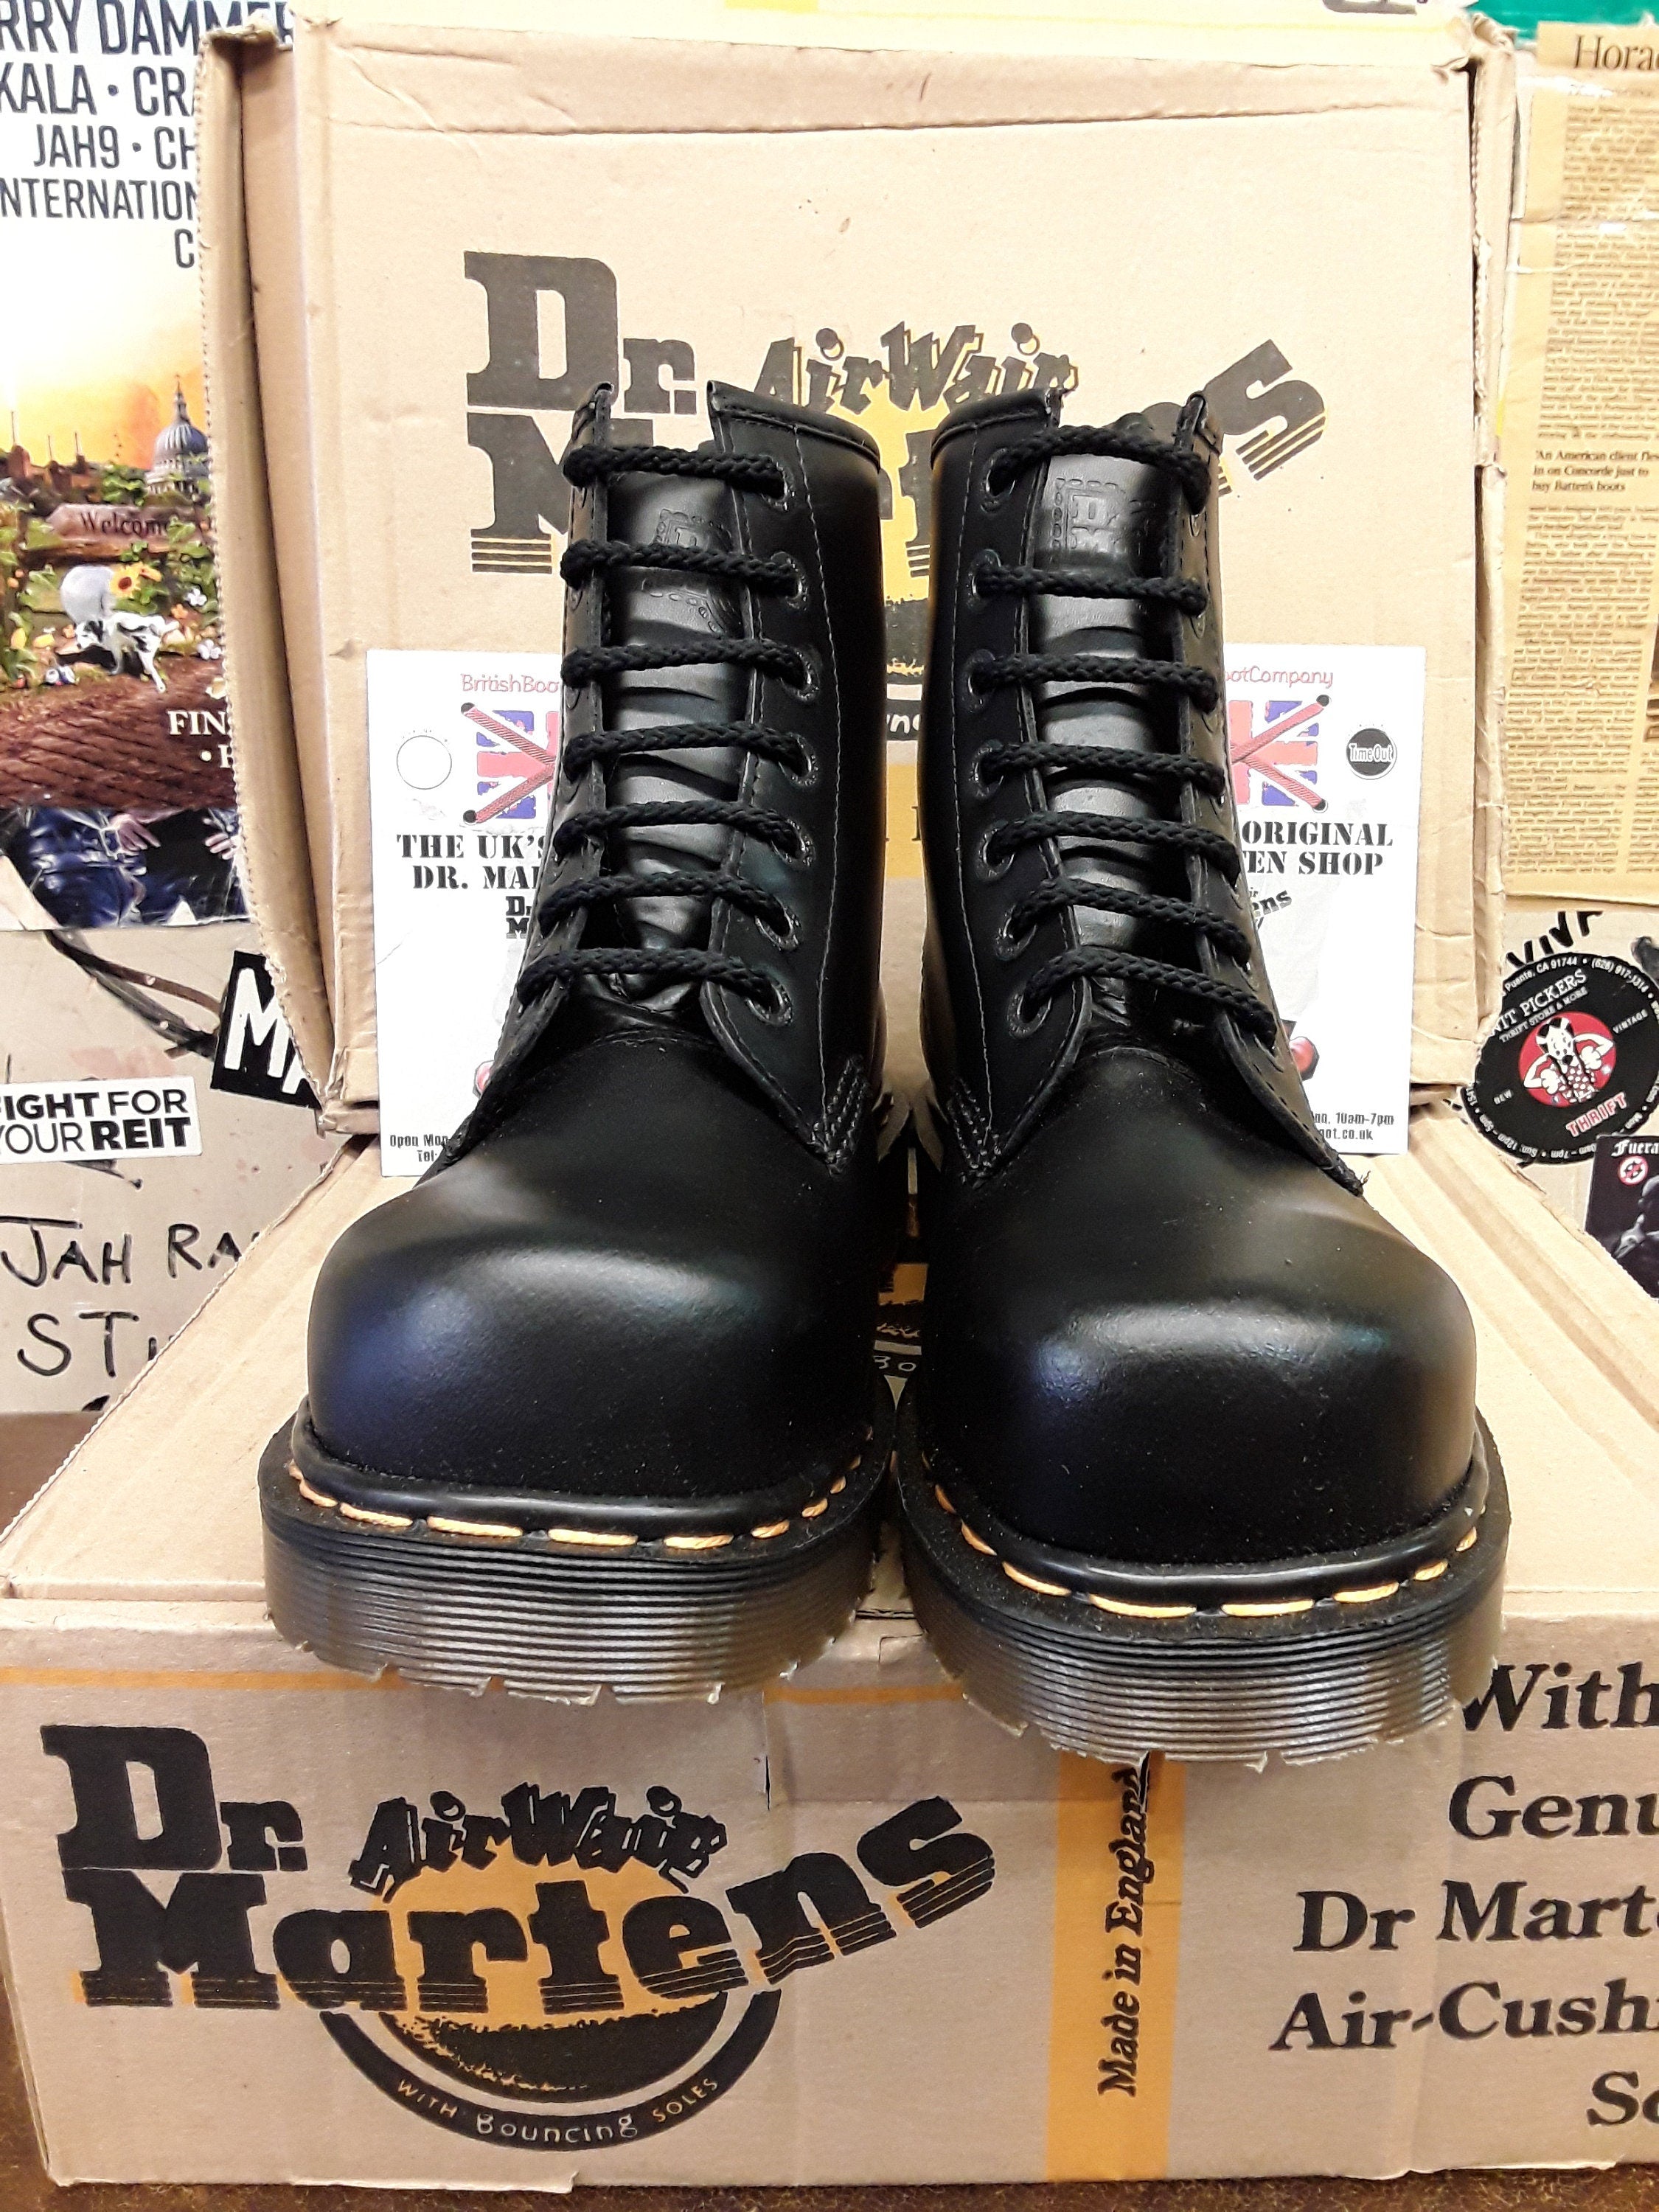 Dr Martens Made in England 7 Hole Industrial Steel Toe Boots Various sizes